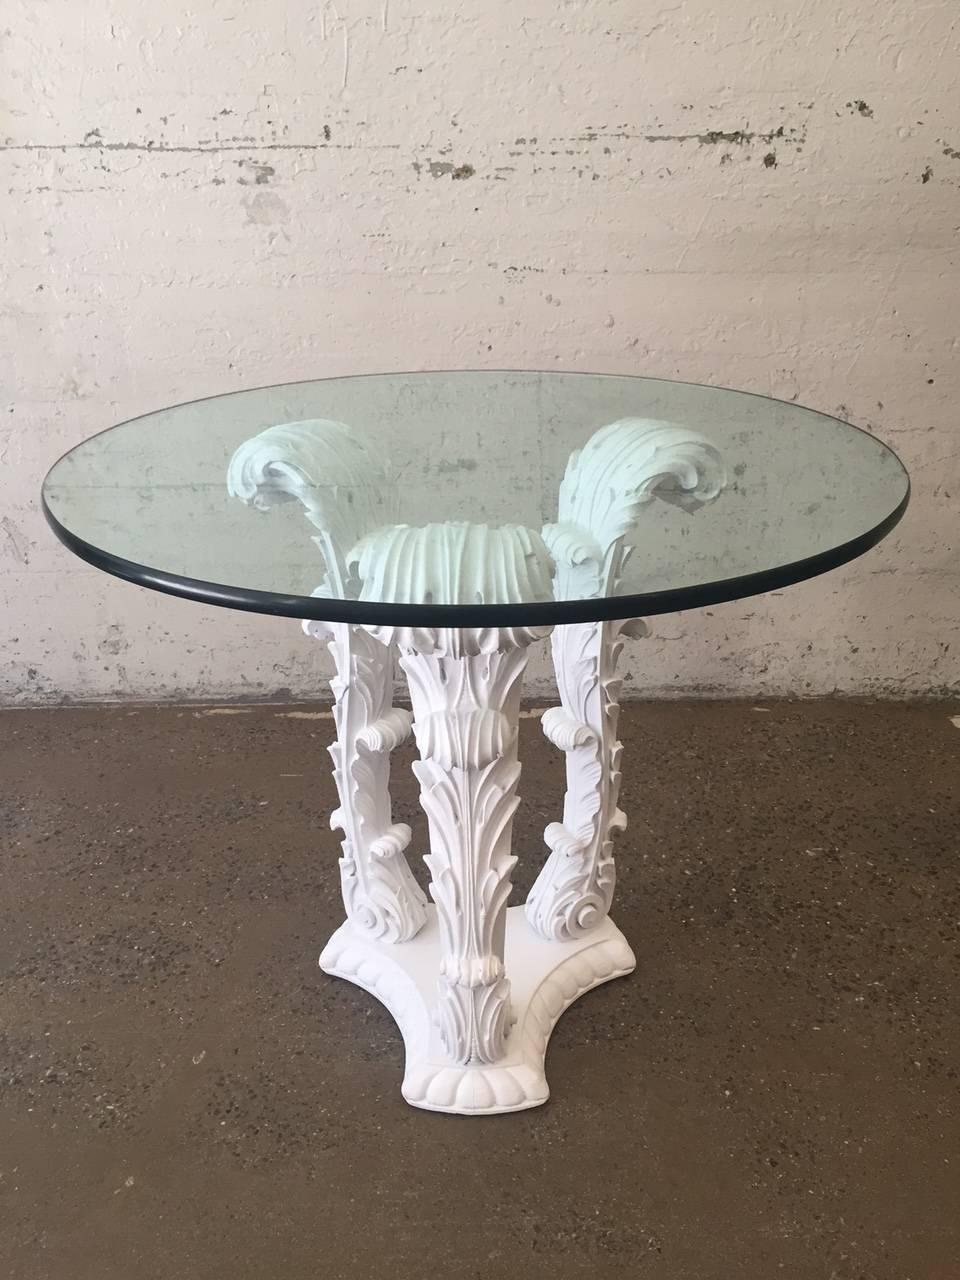 Pair of carved wood tables in the style of Serge Roche. Tables are white lacquered on a solid, carved wood base.